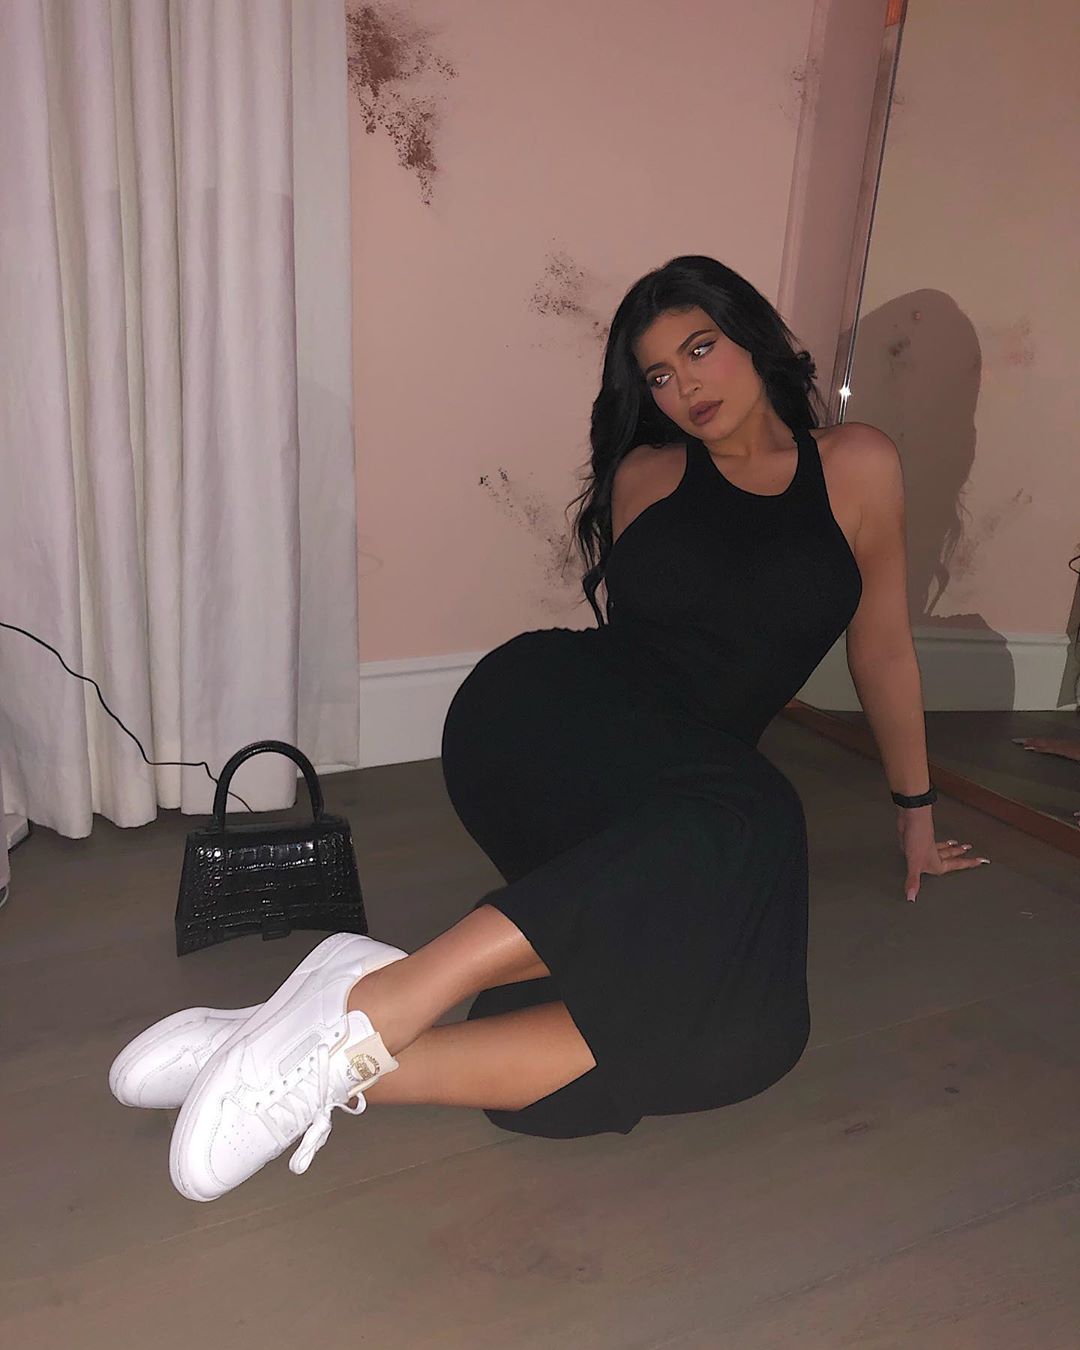 Pregnant' Kylie Jenner shows off her new expensive Hermes bags